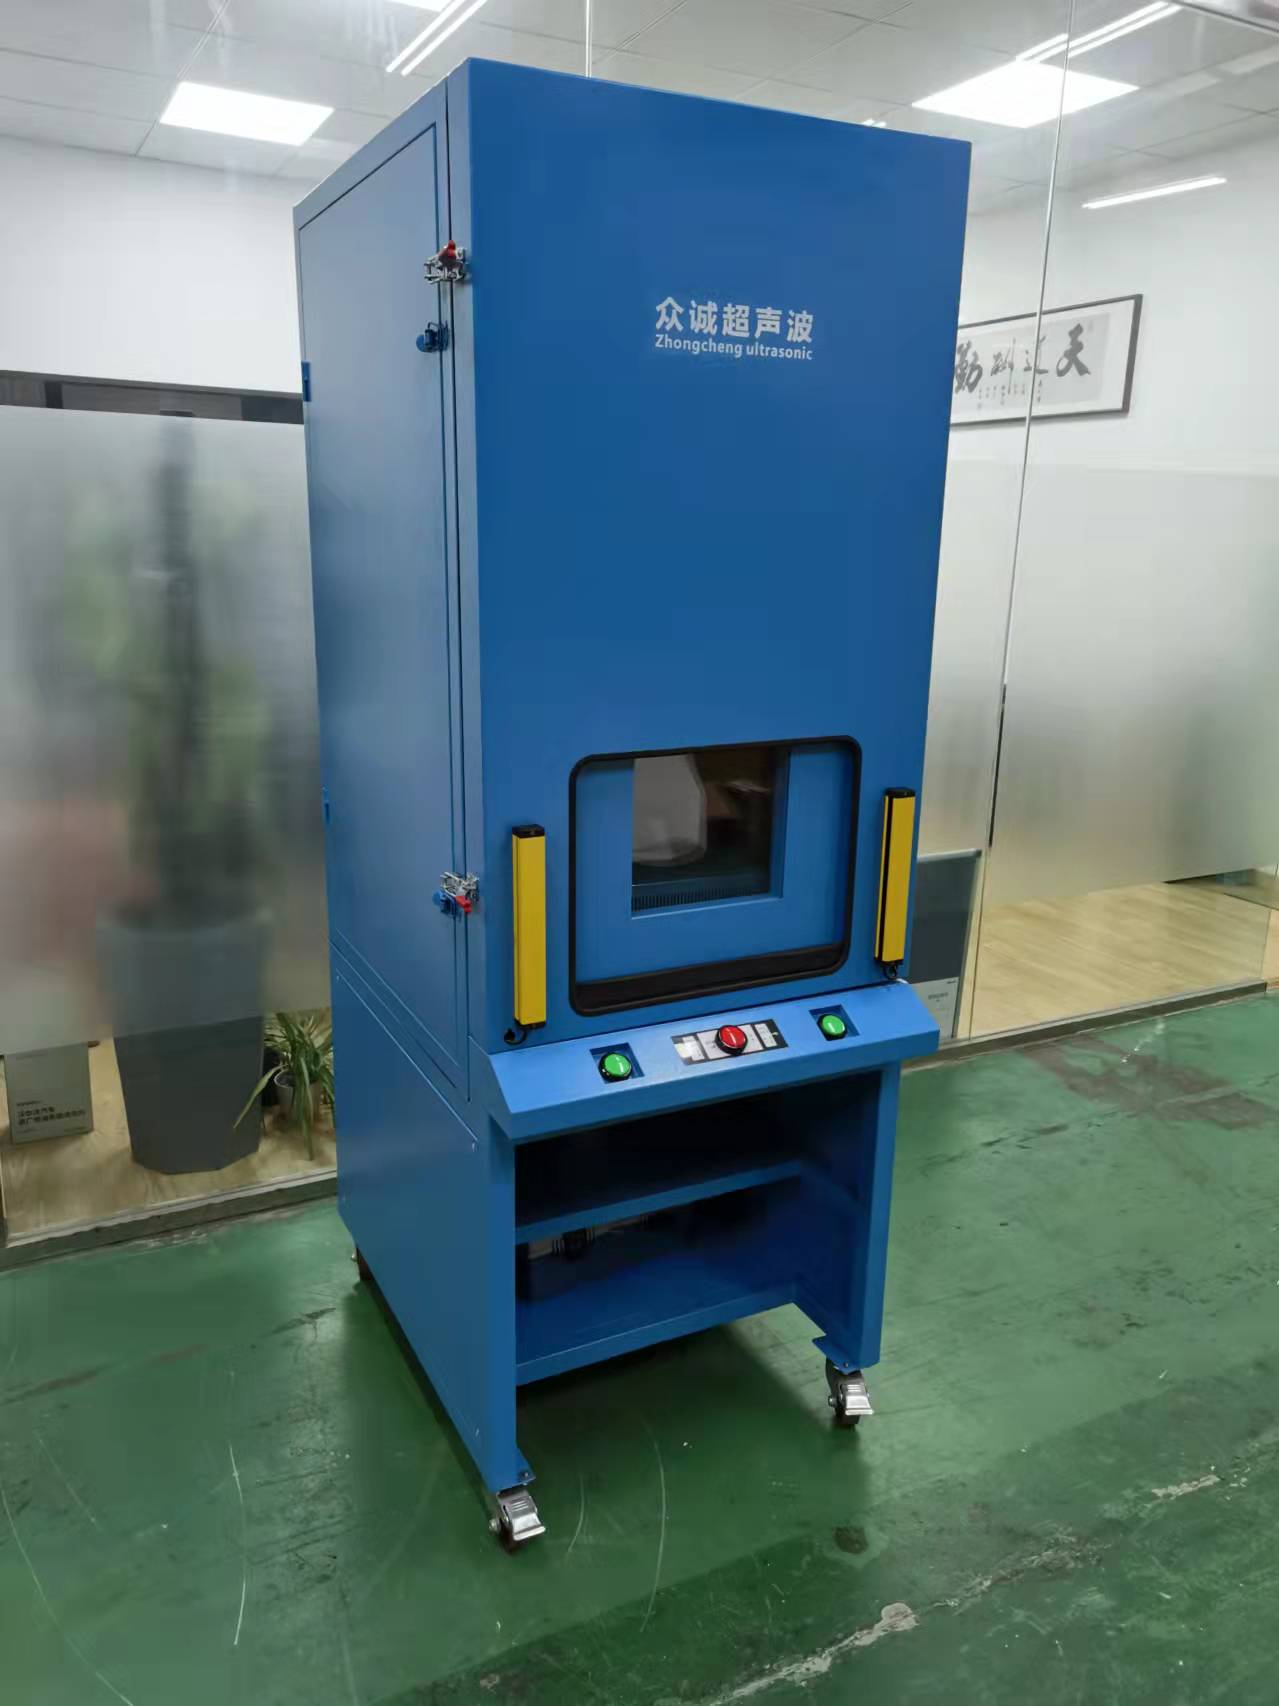 Ultrasonic welding machine (soundproof cover - protective cover)